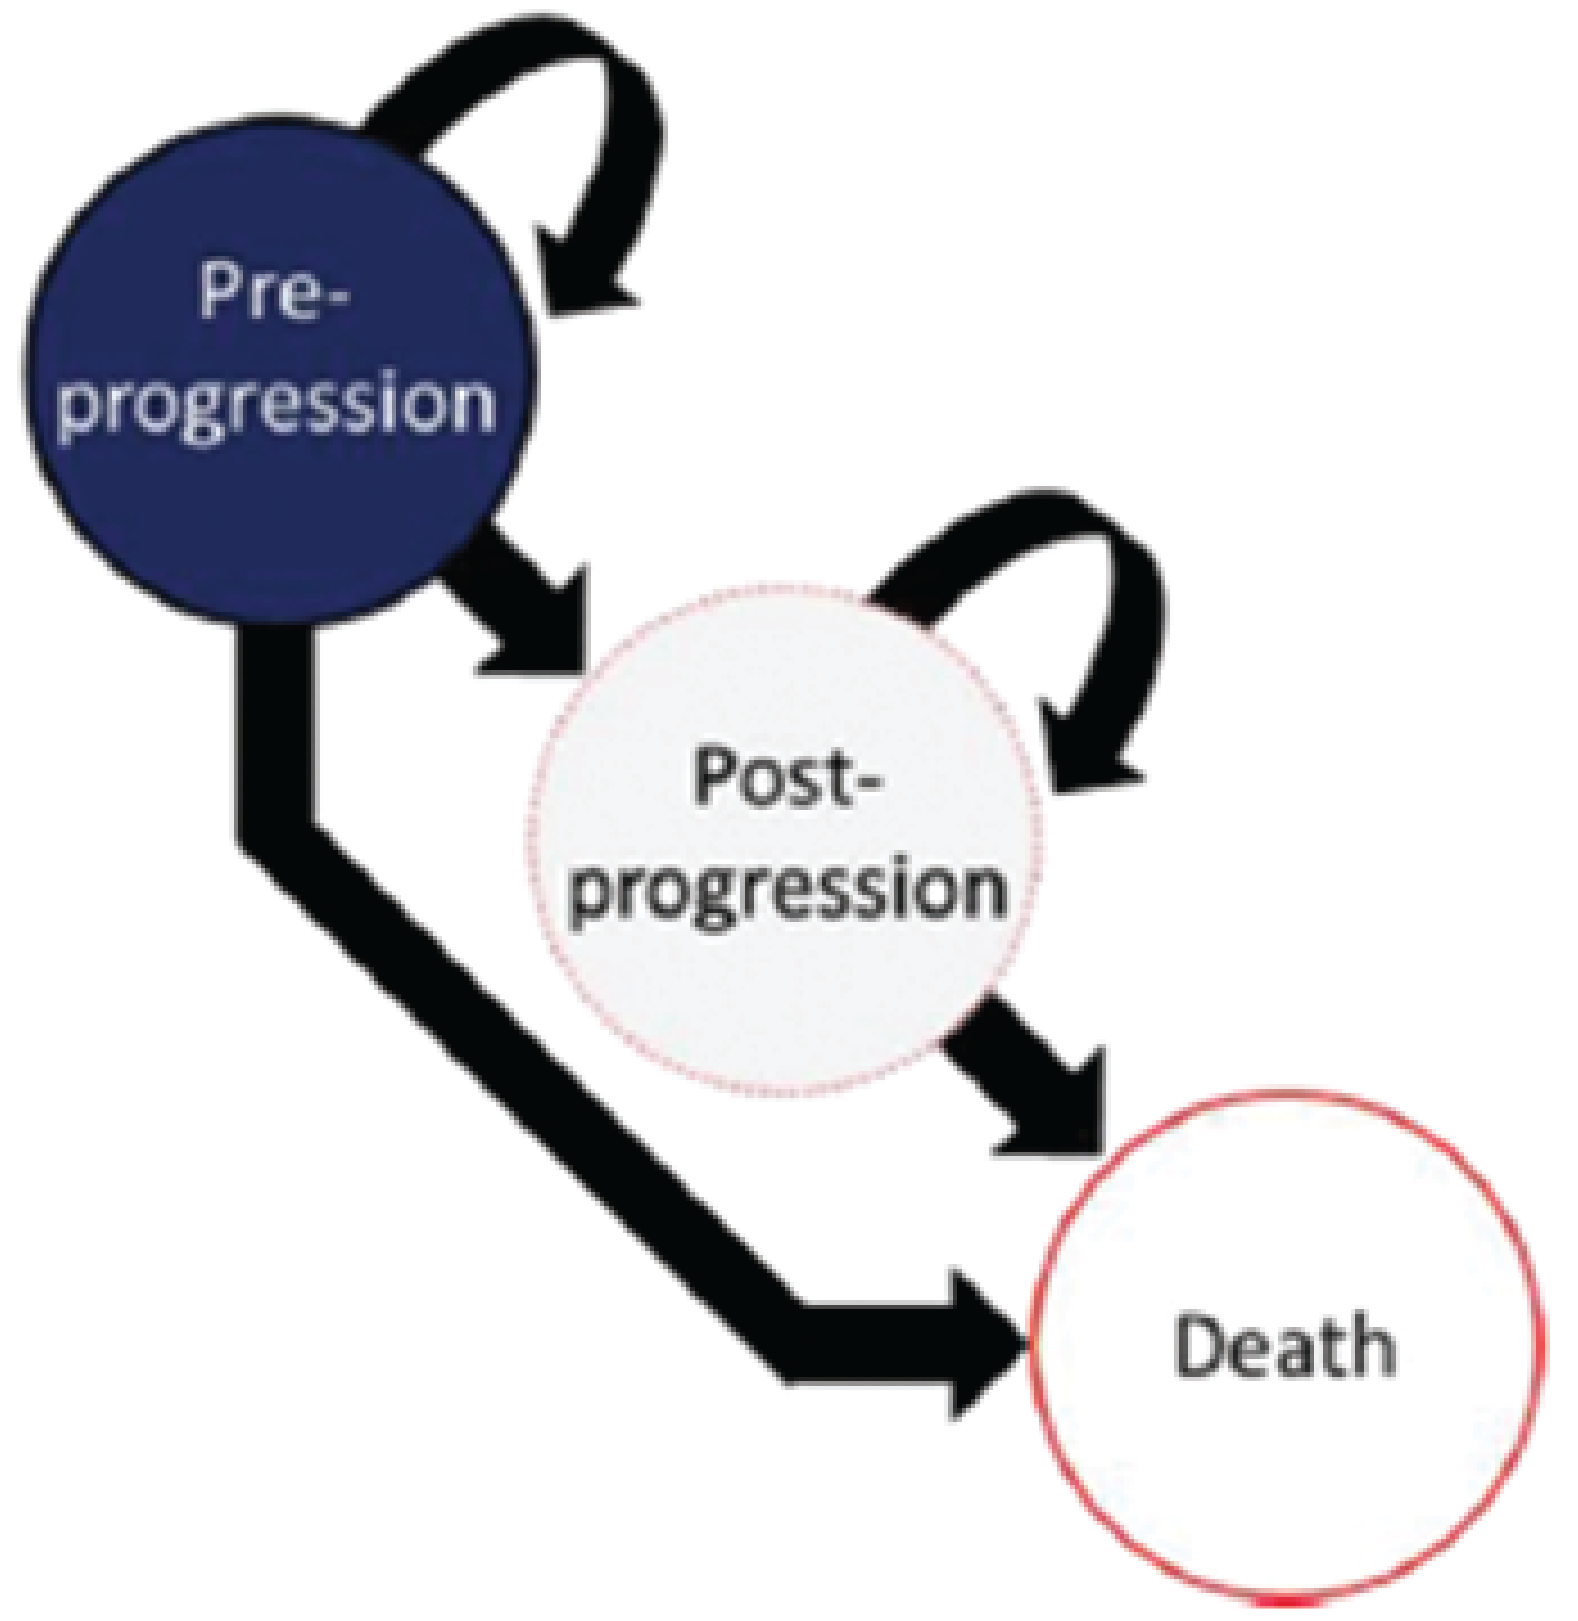 The sponsor submitted a PSM with 3 health states: preprogression, postprogression and death. All patients entered the model in the preprogression health state. During each cycle, patients either remained progression-free, transitioned to the progressive-disease state, or they progressed to death. Patients in the postprogression state could either remain in the same state or move to death. Death was modelled as an absorbing state.